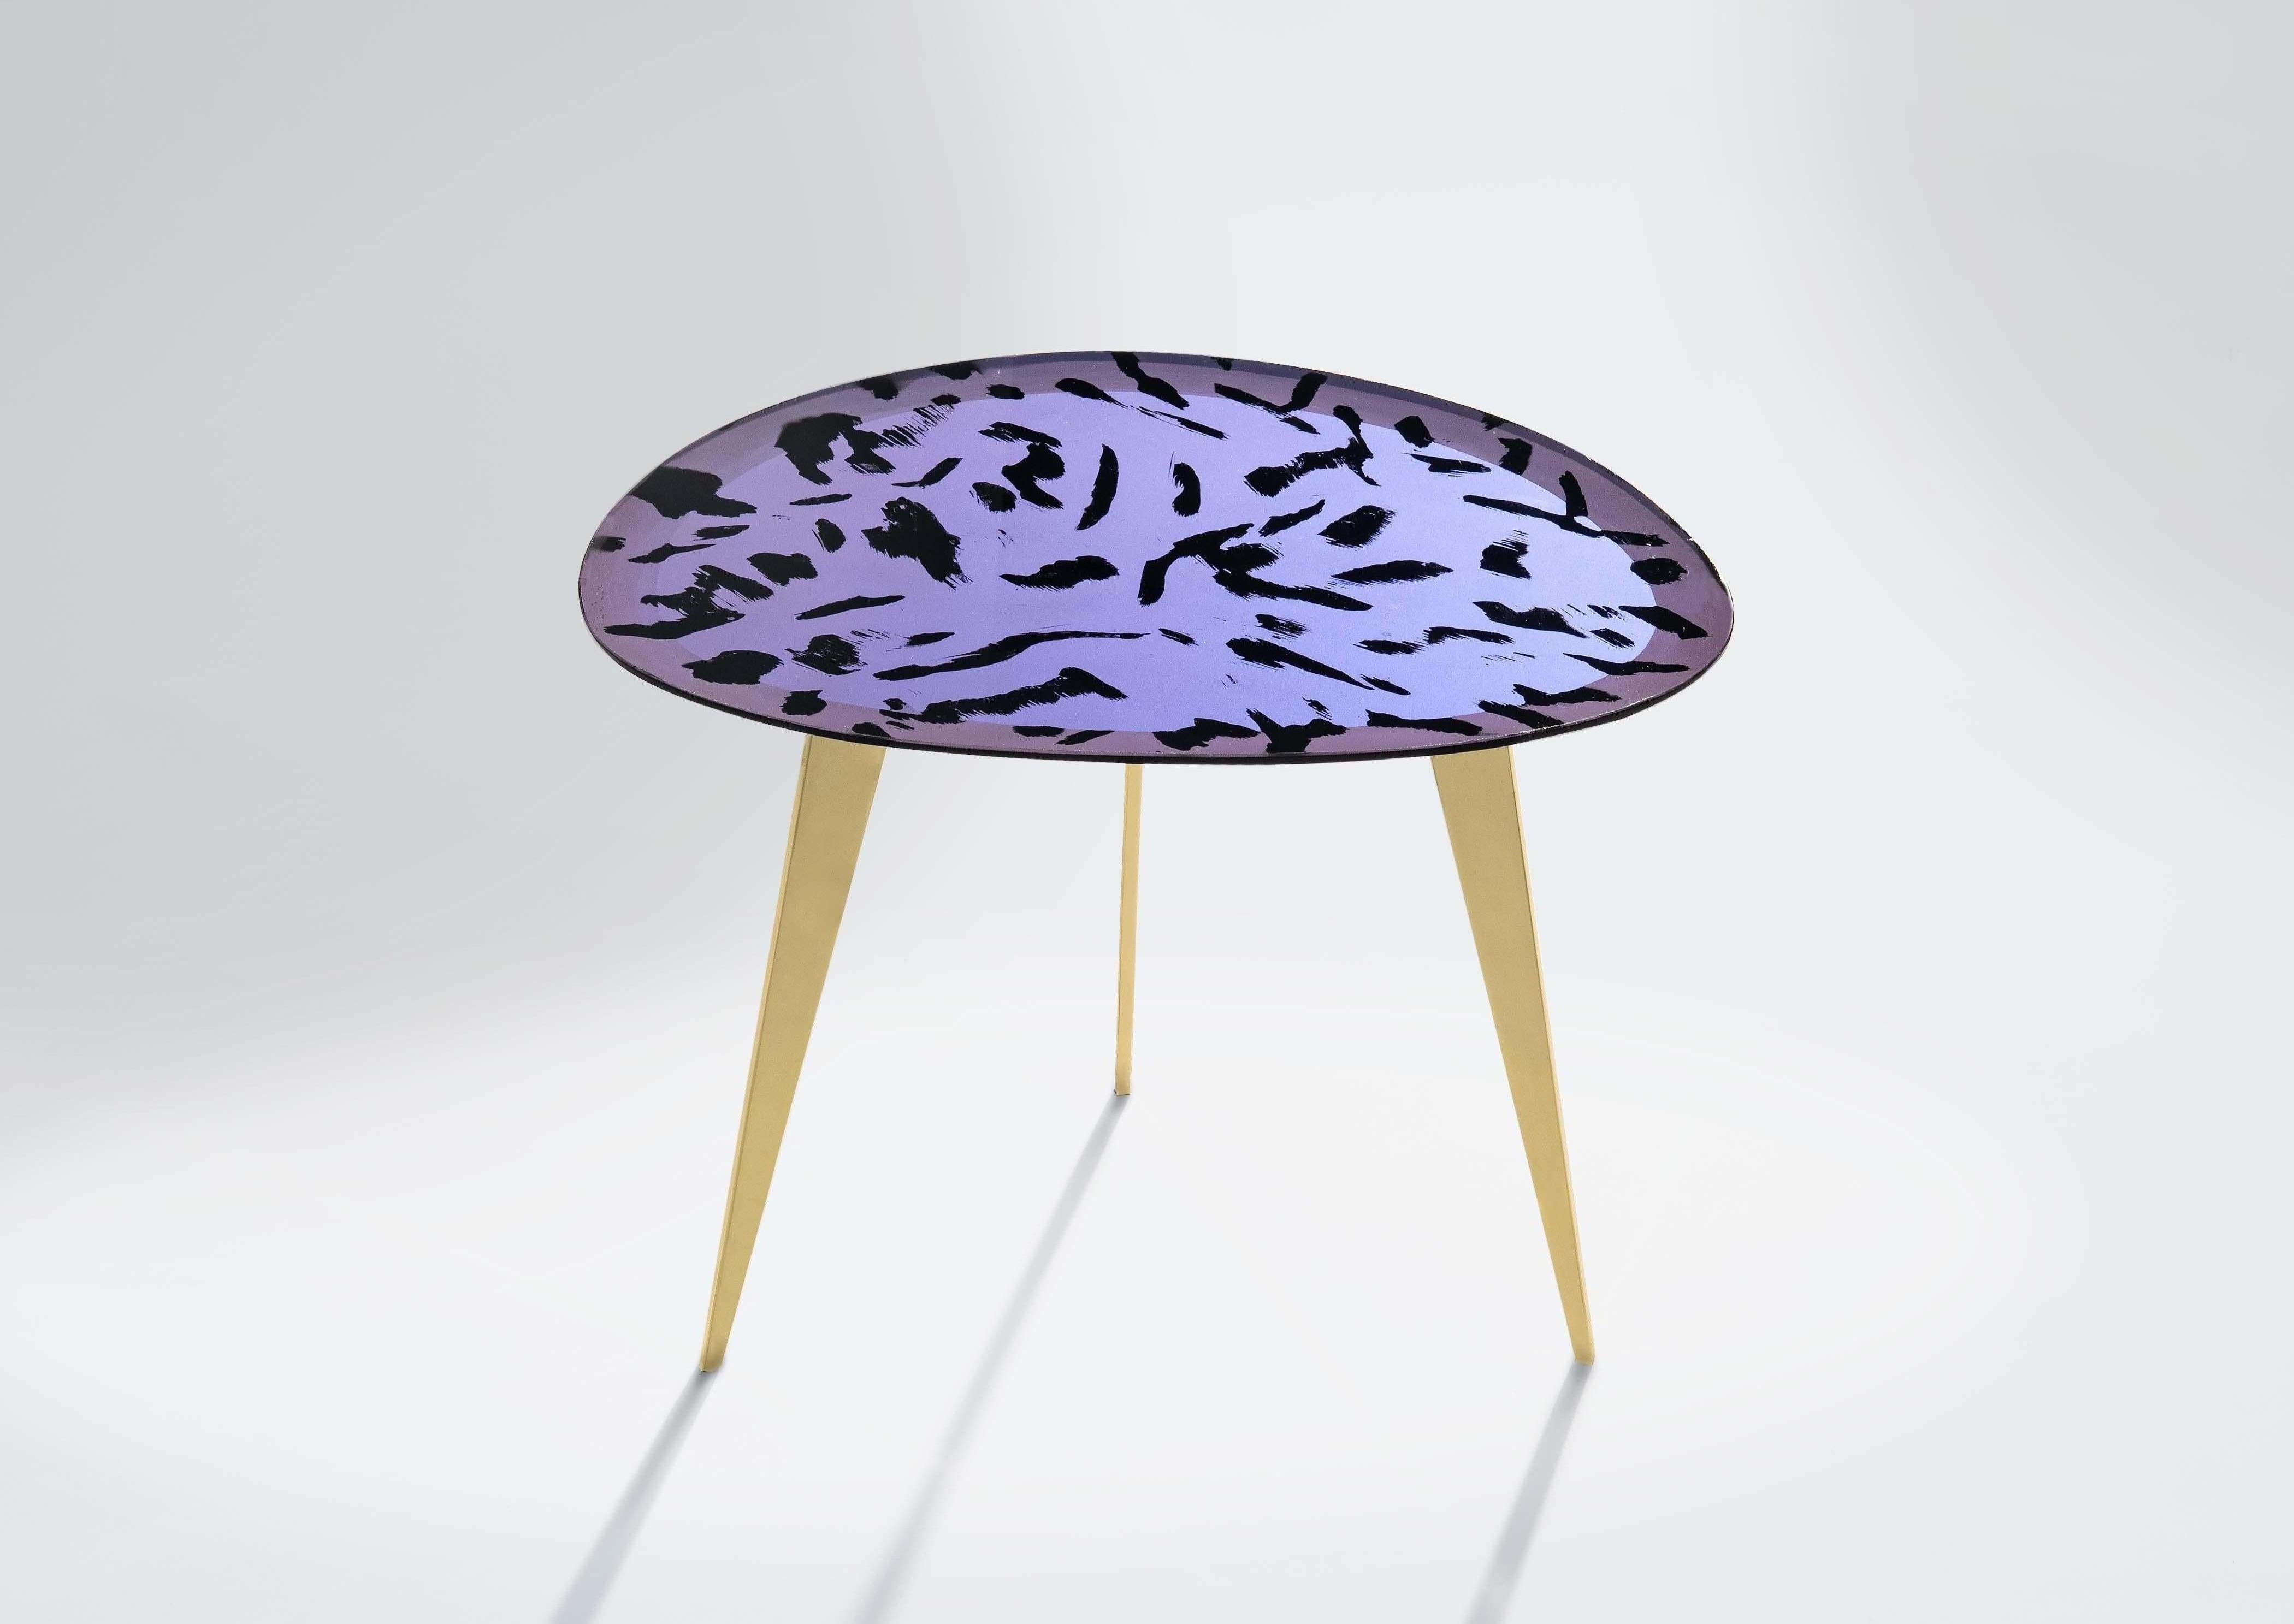 
The coffee table Puà is born from instinct, from the artist’s desire to create an eye-catching coffee table, out of the box and extremely contemporary. The entire support structure is made with brass. The underplate is matt black color while legs